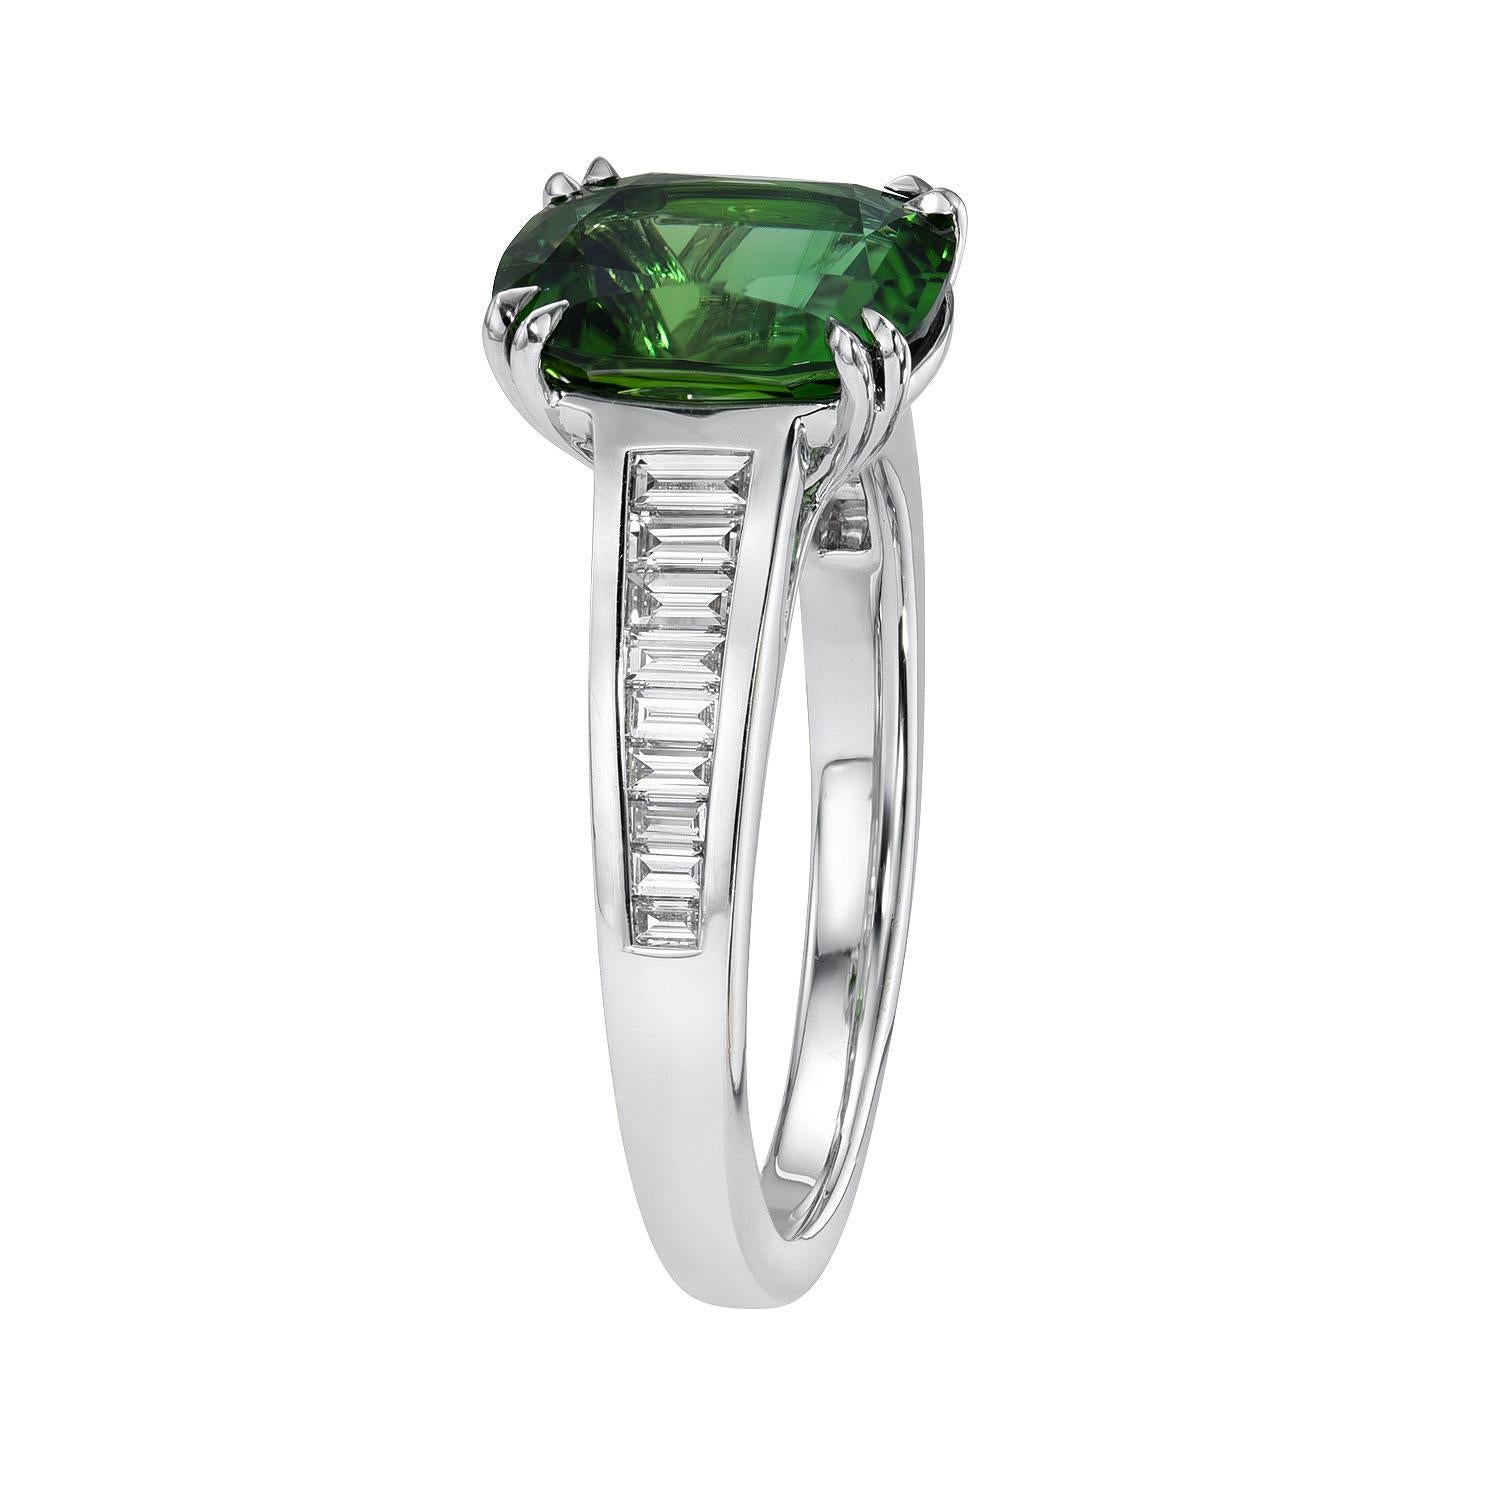 Exquisite and exclusive 2.75 carat Chrome Green Tourmaline cushion, 18K white gold ring, decorated with a total of 0.46 carat collection baguette diamonds.
Ring size 6.5. Resizing is complementary upon request.
Returns are accepted and paid by us